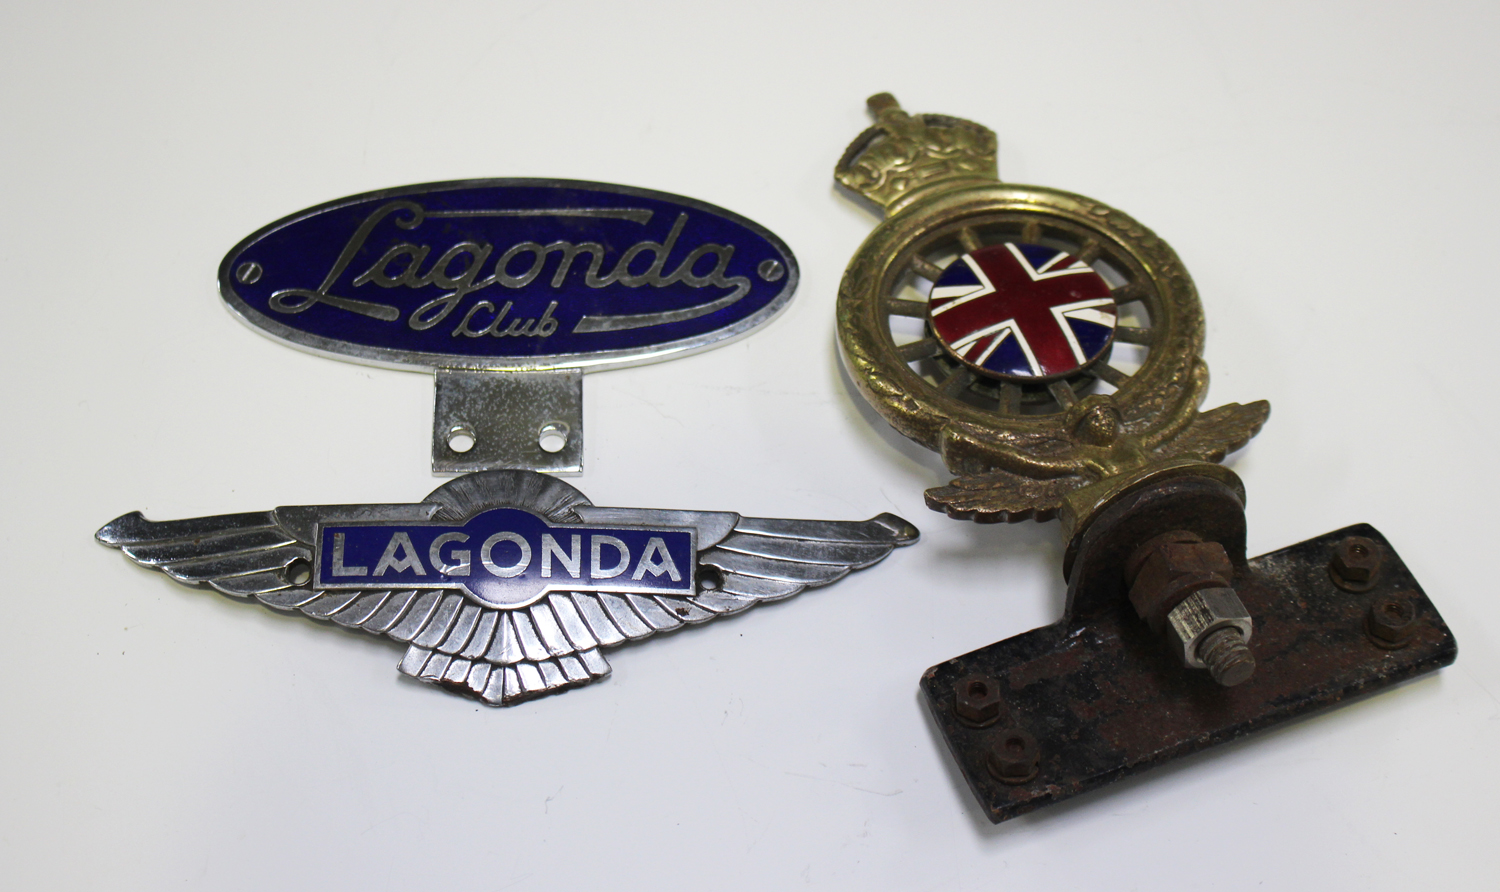 A Royal Automobile Club cast brass member's badge with enamelled Union Jack, detailed 'L Kinston &